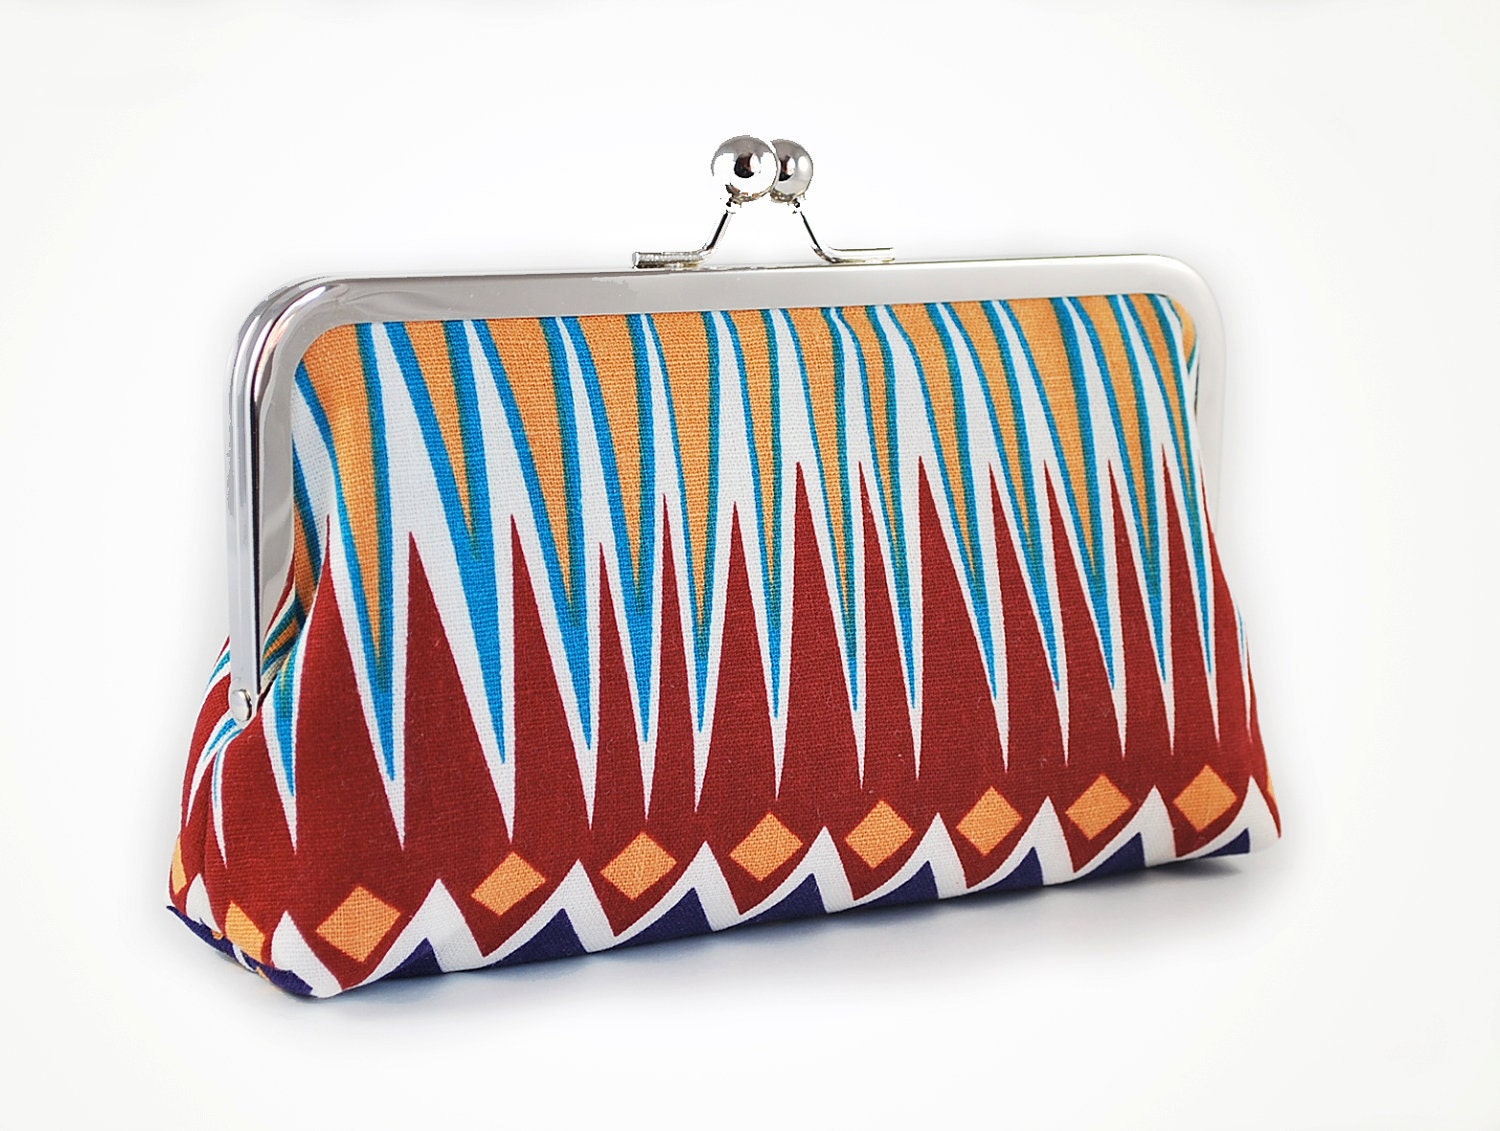 Tribal clutch with zigzags in yellow and red